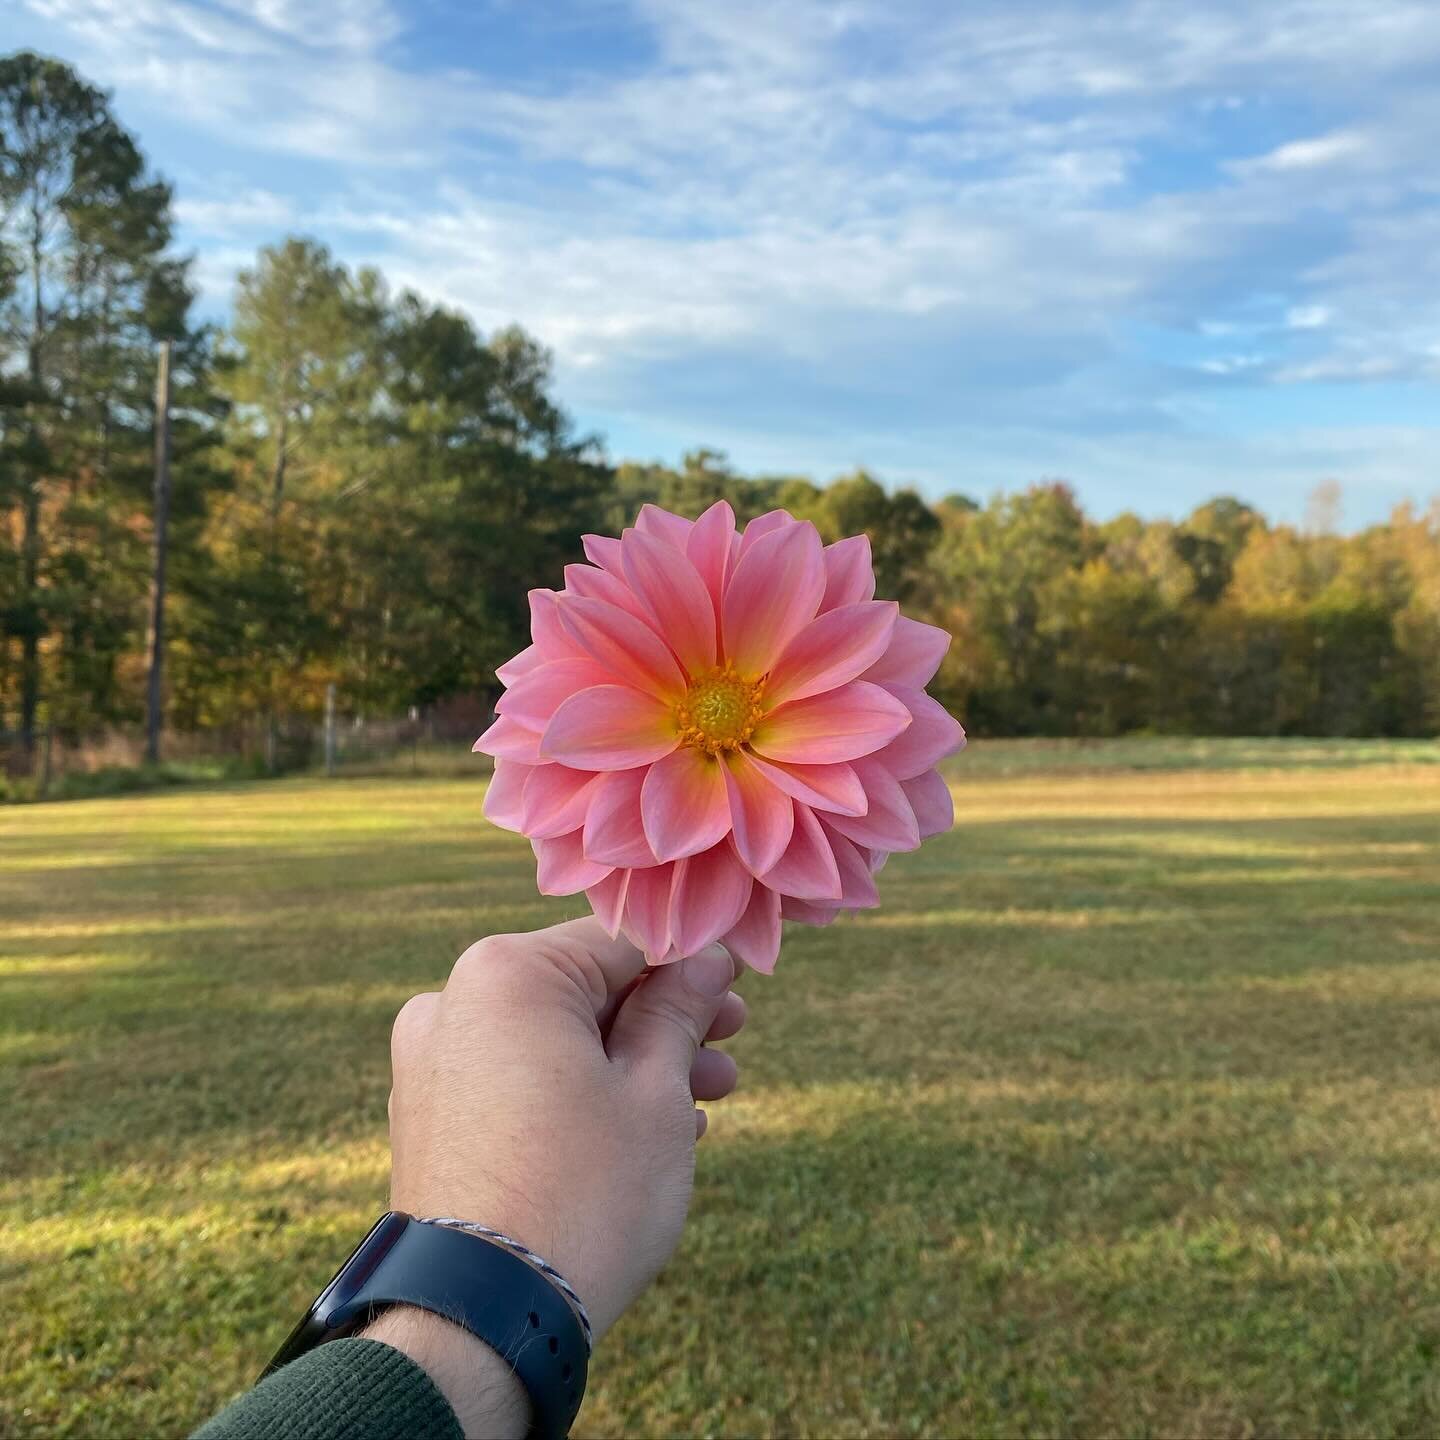 This second year seedling was chosen as my wife&rsquo;s favorite, and it&rsquo;s being named after her. More on that in a moment. Year two and it&rsquo;s still looking great. 

The color is slightly more peach than the vibrancy of the pink showing up